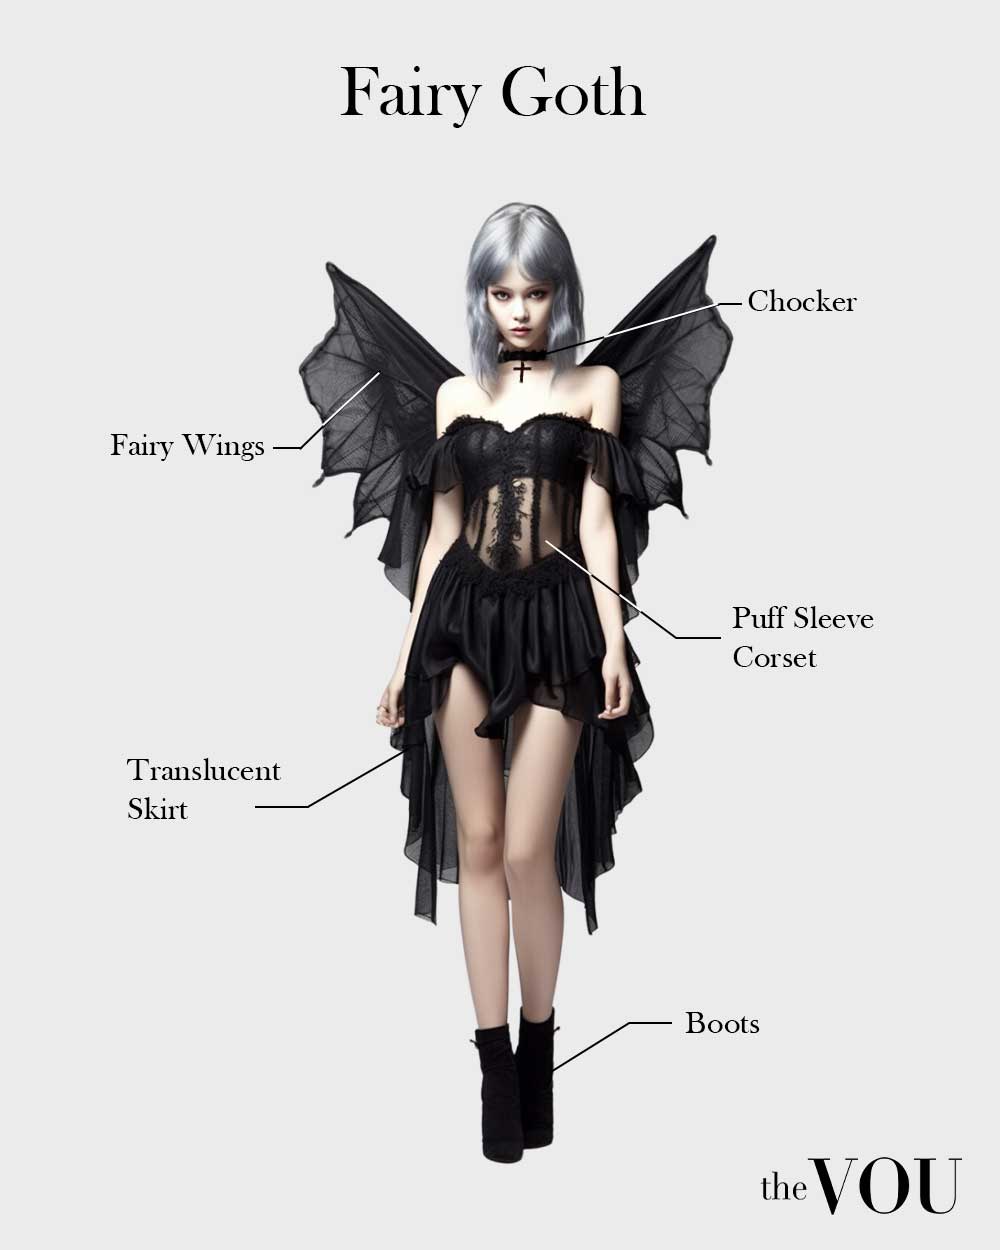 fairy goth outfit elements